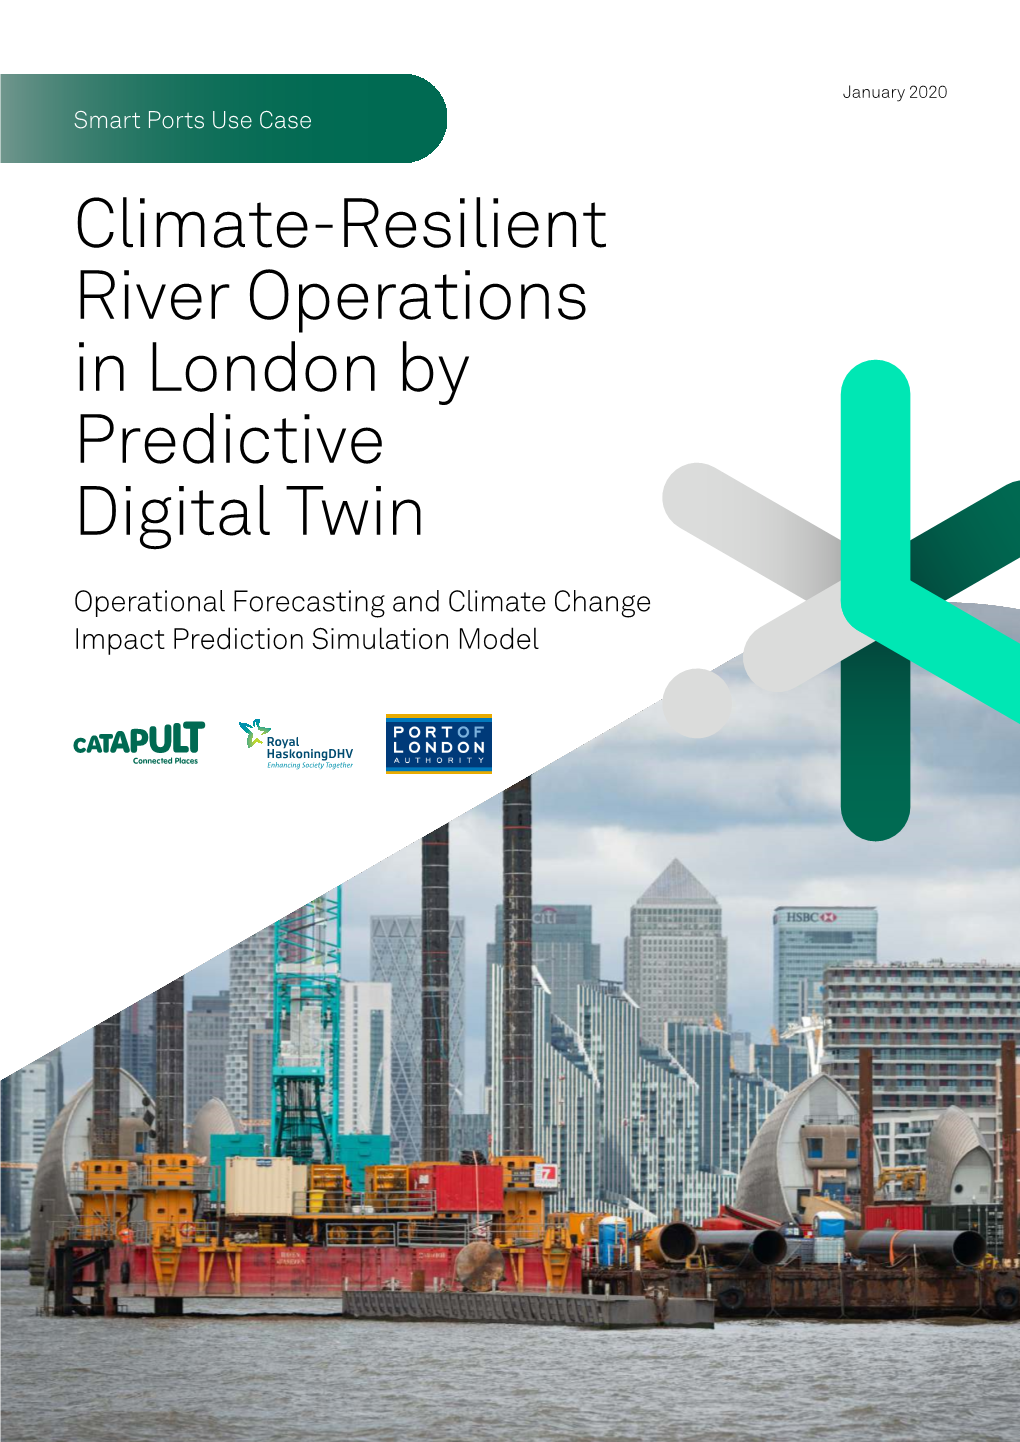 Climate-Resilient River Operations in London by Predictive Digital Twin